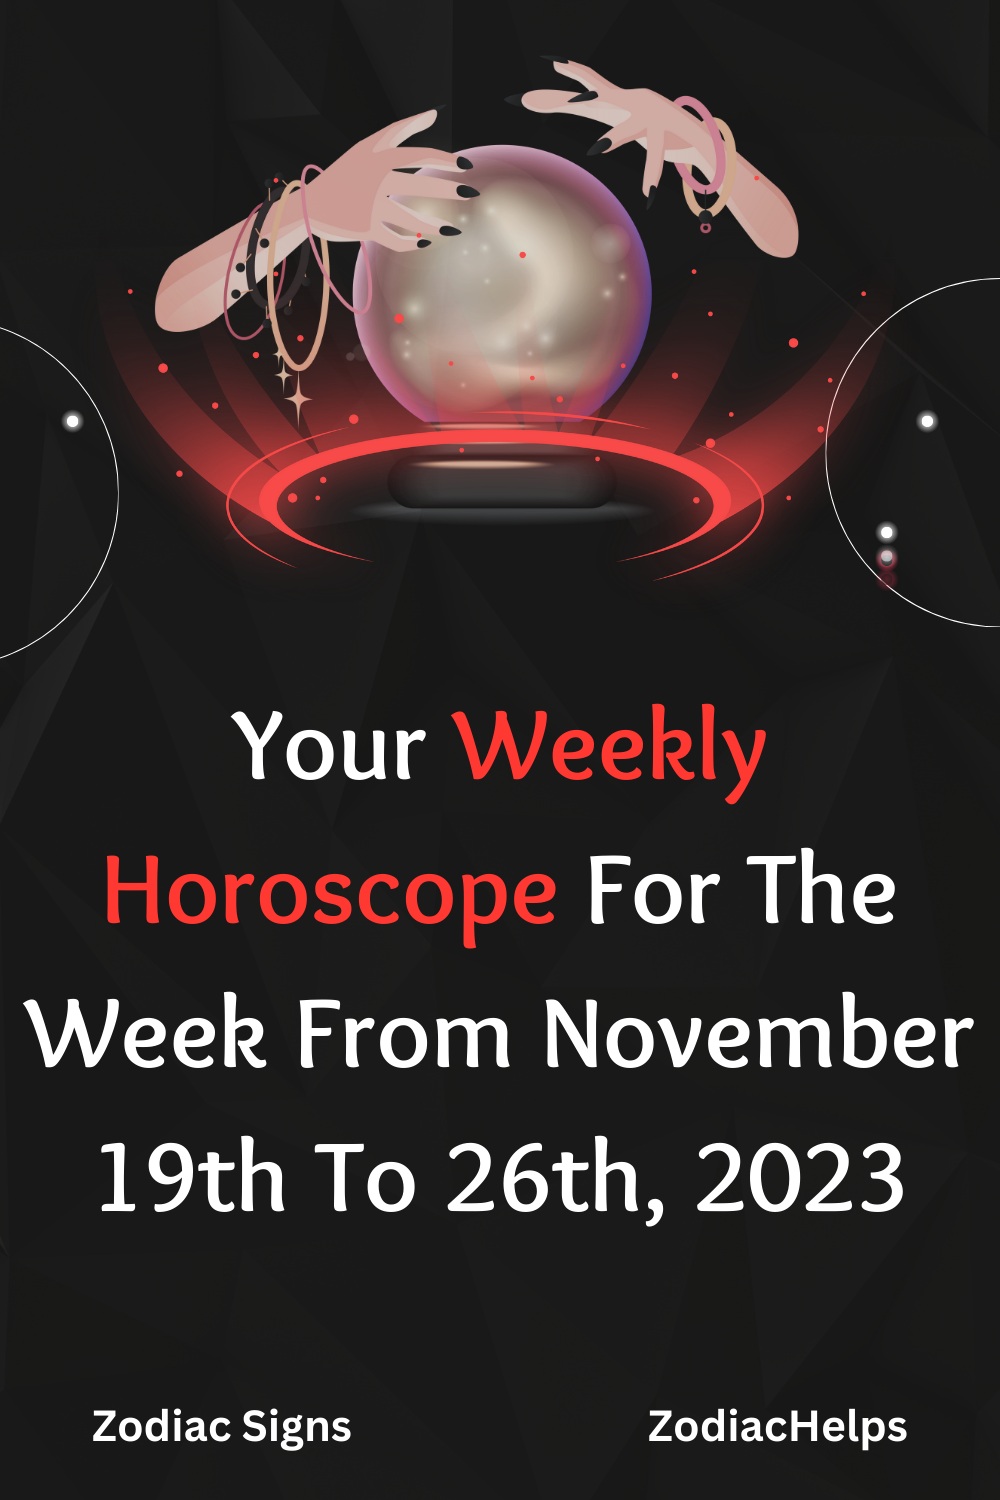 Your Weekly Horoscope For The Week From November 19th To 26th, 2023